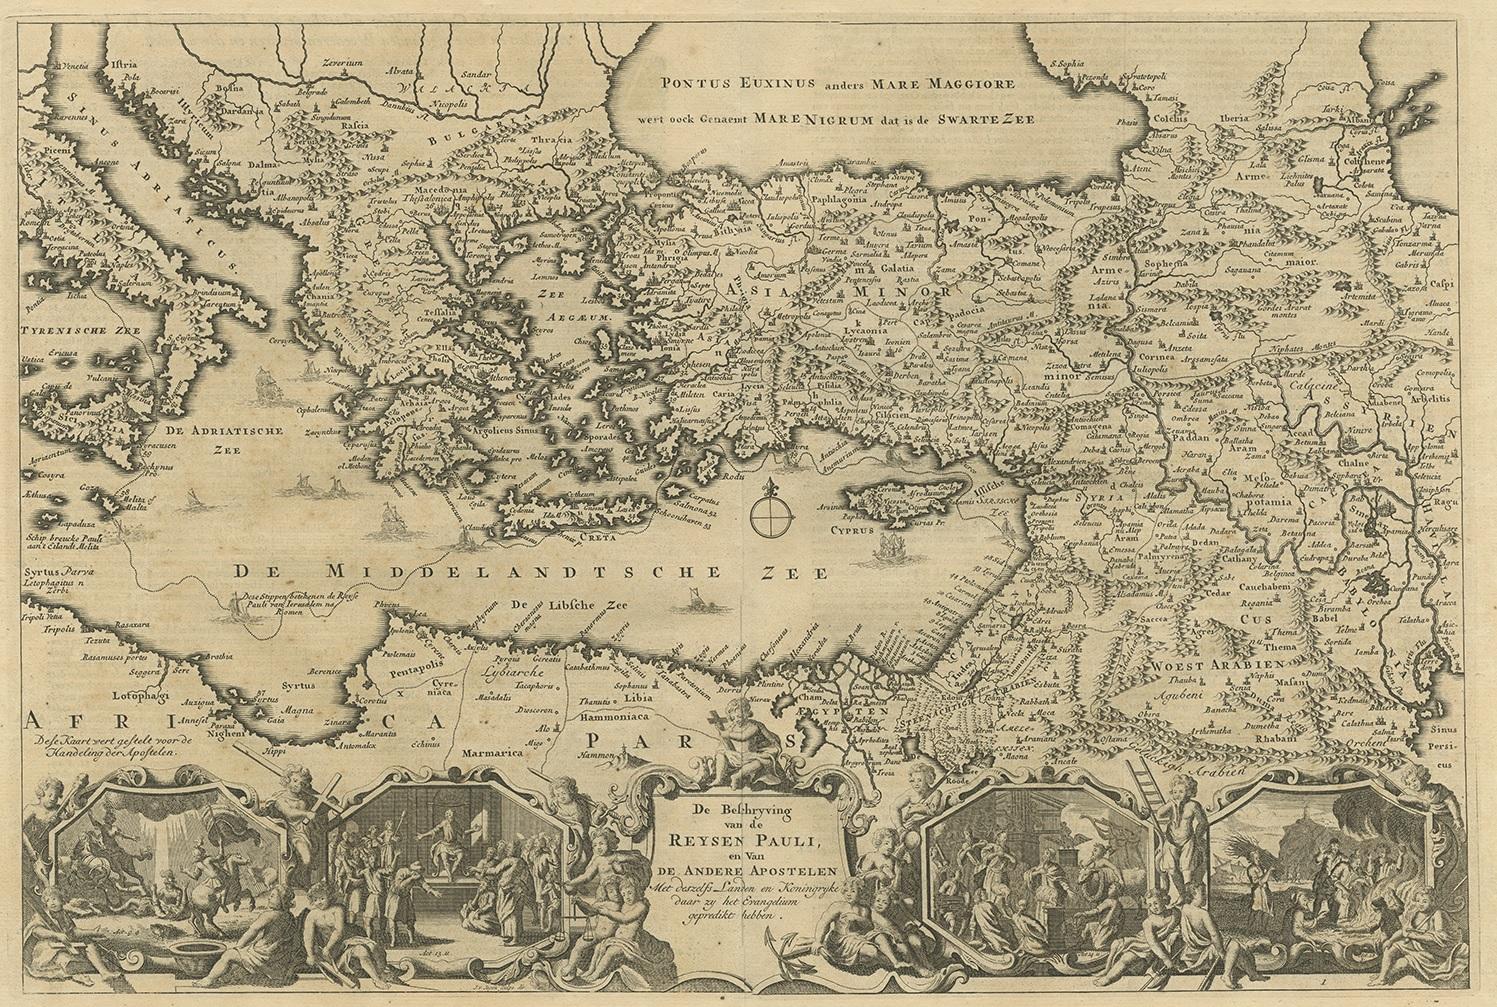 Antique map Middle East titled 'De Beschryving van de Reysen Pauli en van de Andere Apostelen'. Antique map of the Eastern Mediterranean with details of the travels by Apostle Paul and other apostles. Decorated with four Biblical scenes in vignettes.